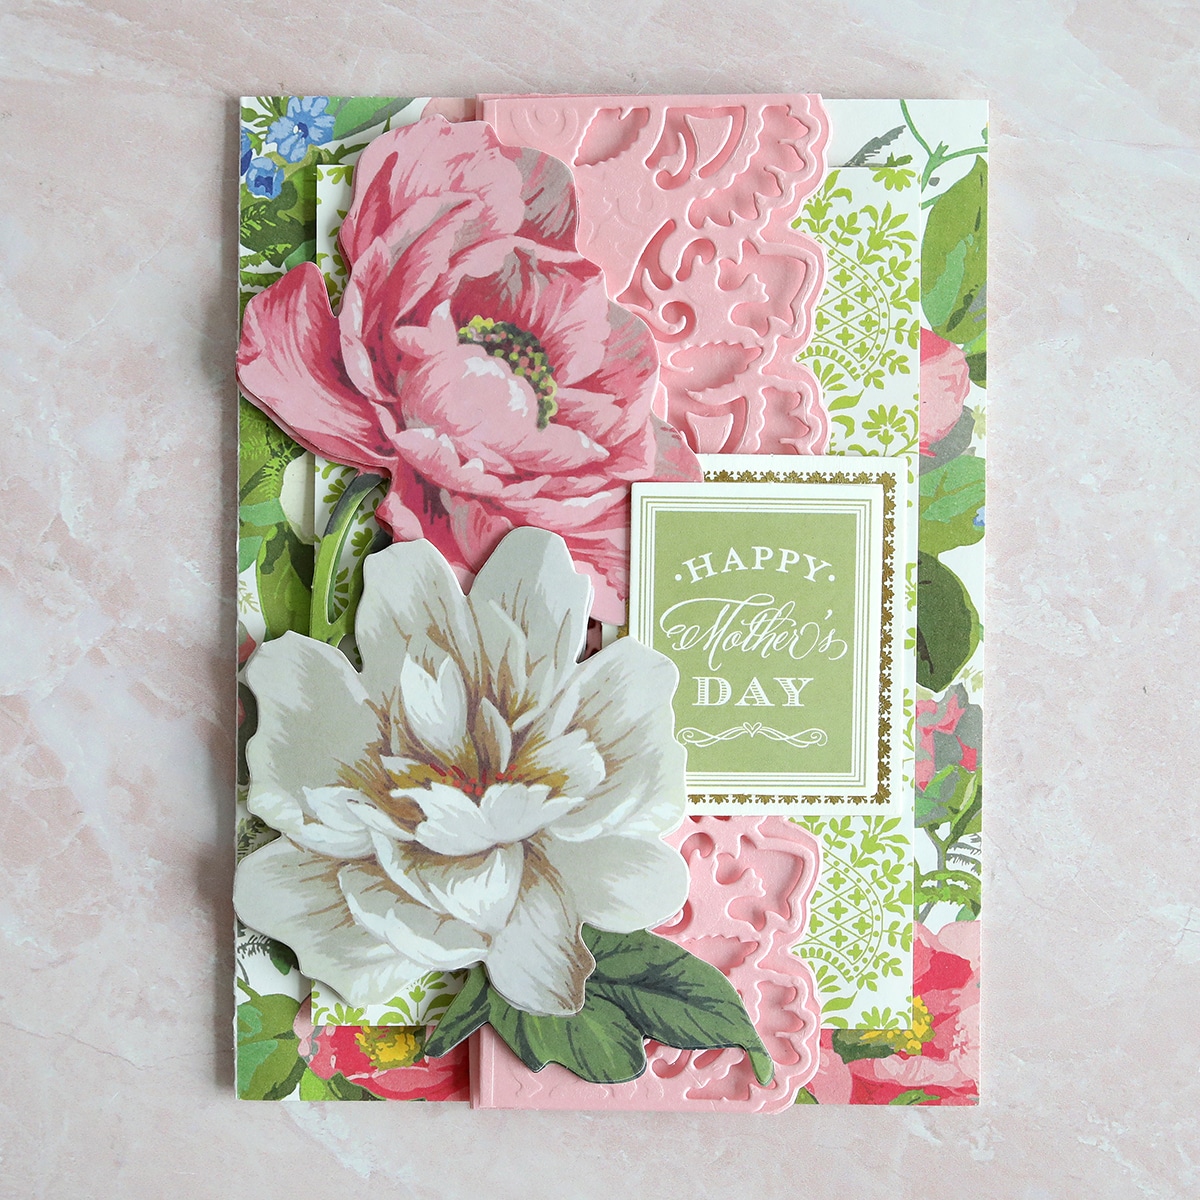 a card with flowers on it and a happy mother's day card.